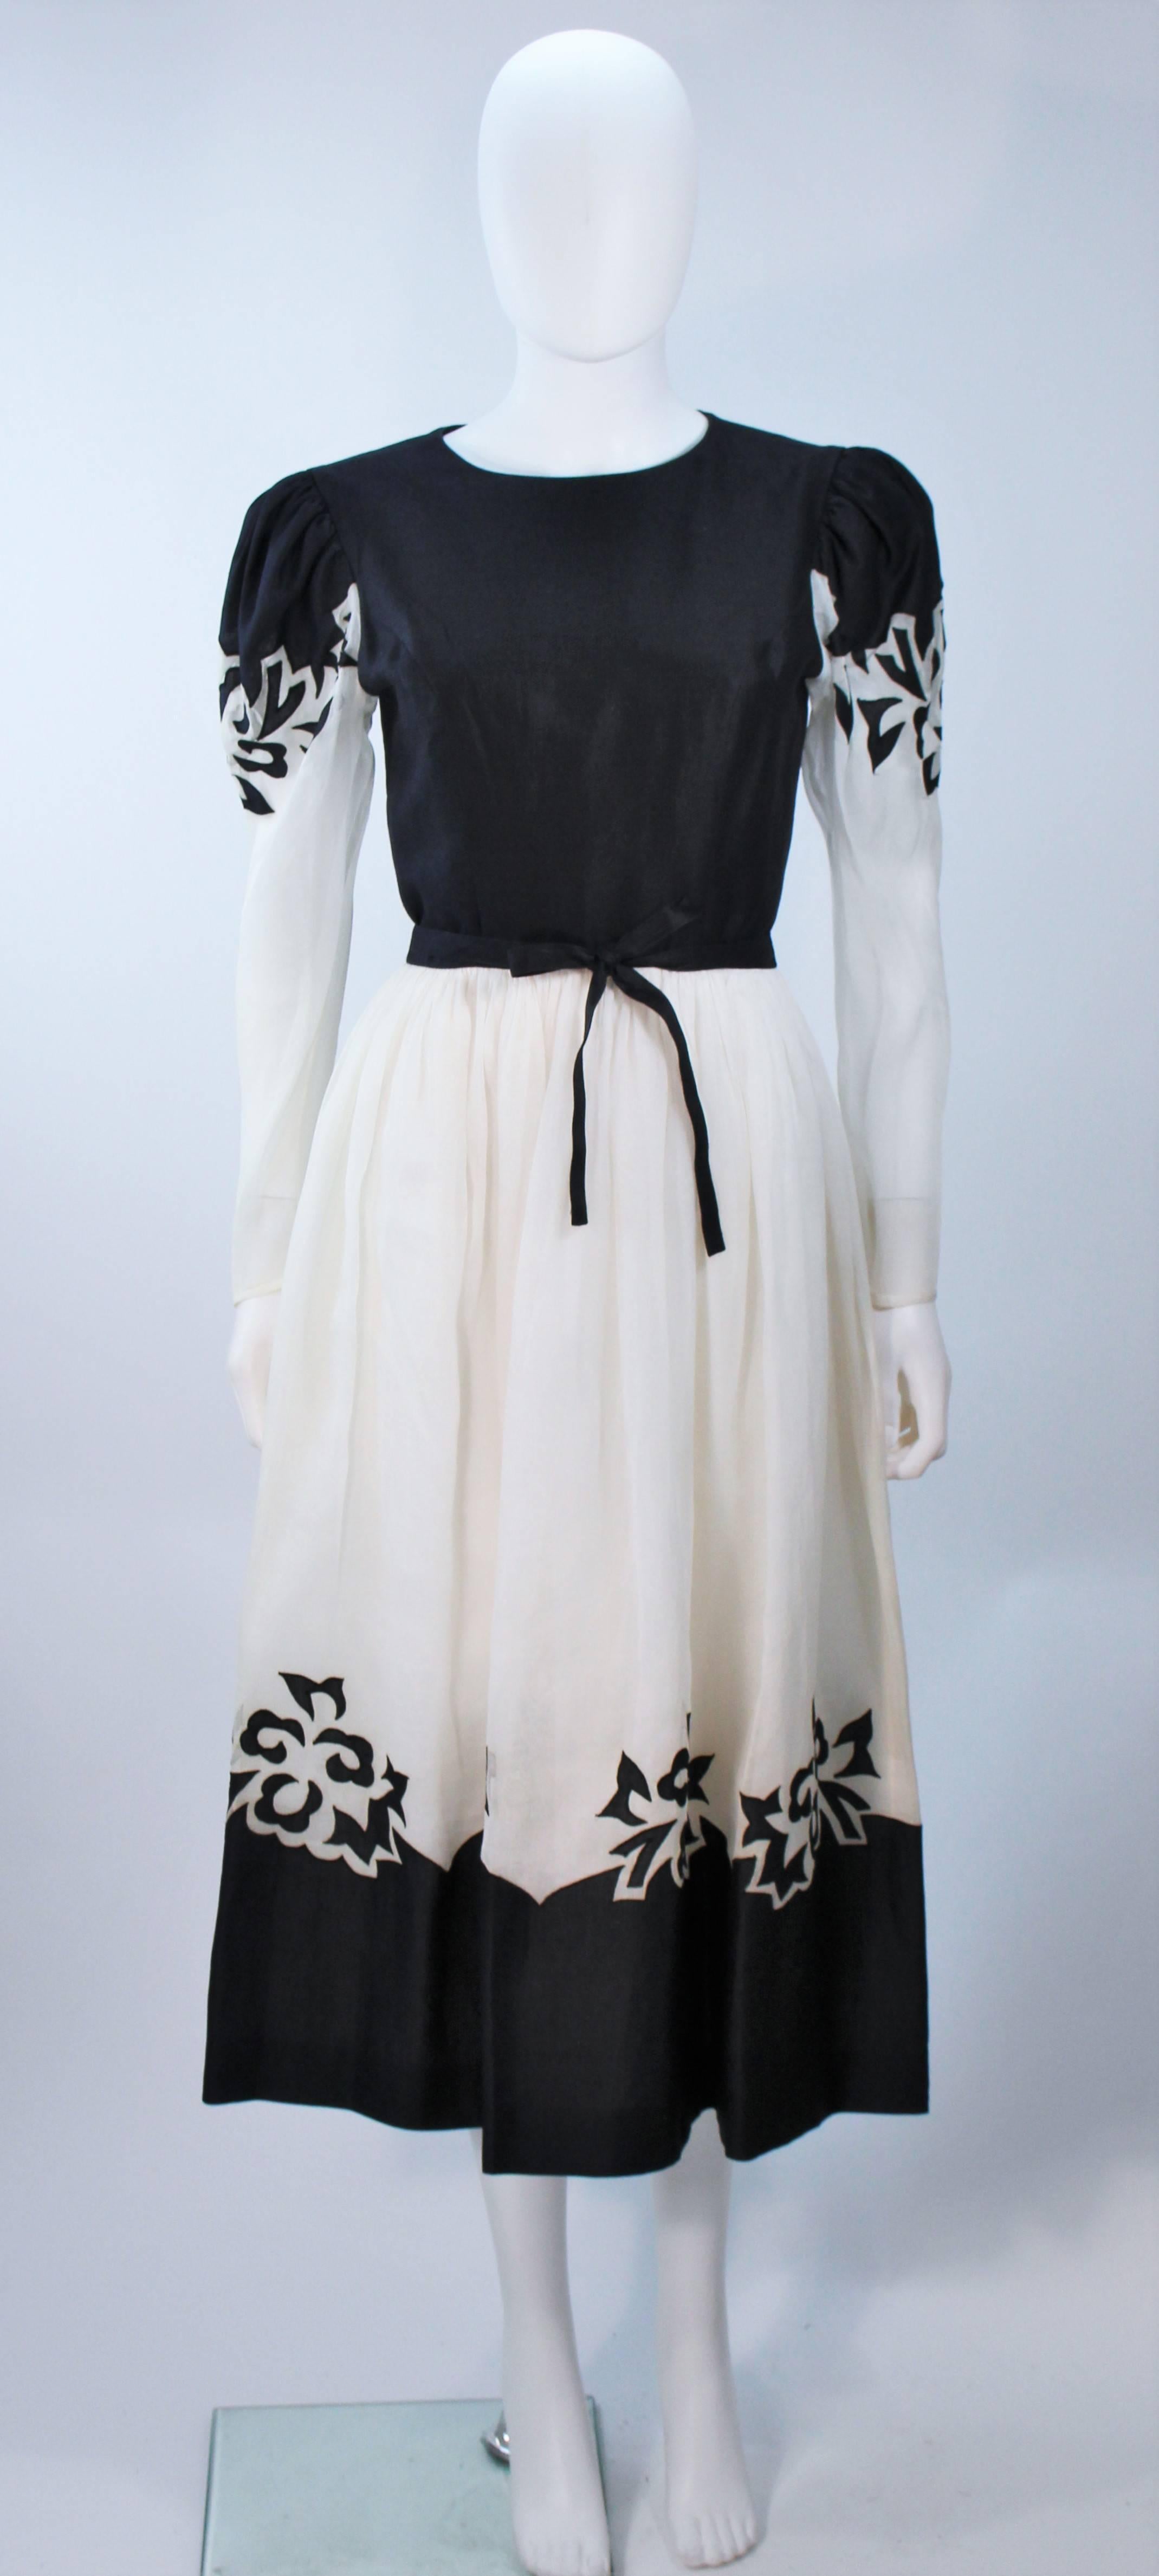  This Albert Nipon  dress is composed of a white and black color blocked fabric with a floral print applique. Features puffed shoulders and sheer sleeves  There is a zipper closure.  In excellent vintage condition. 

  **Please cross-reference